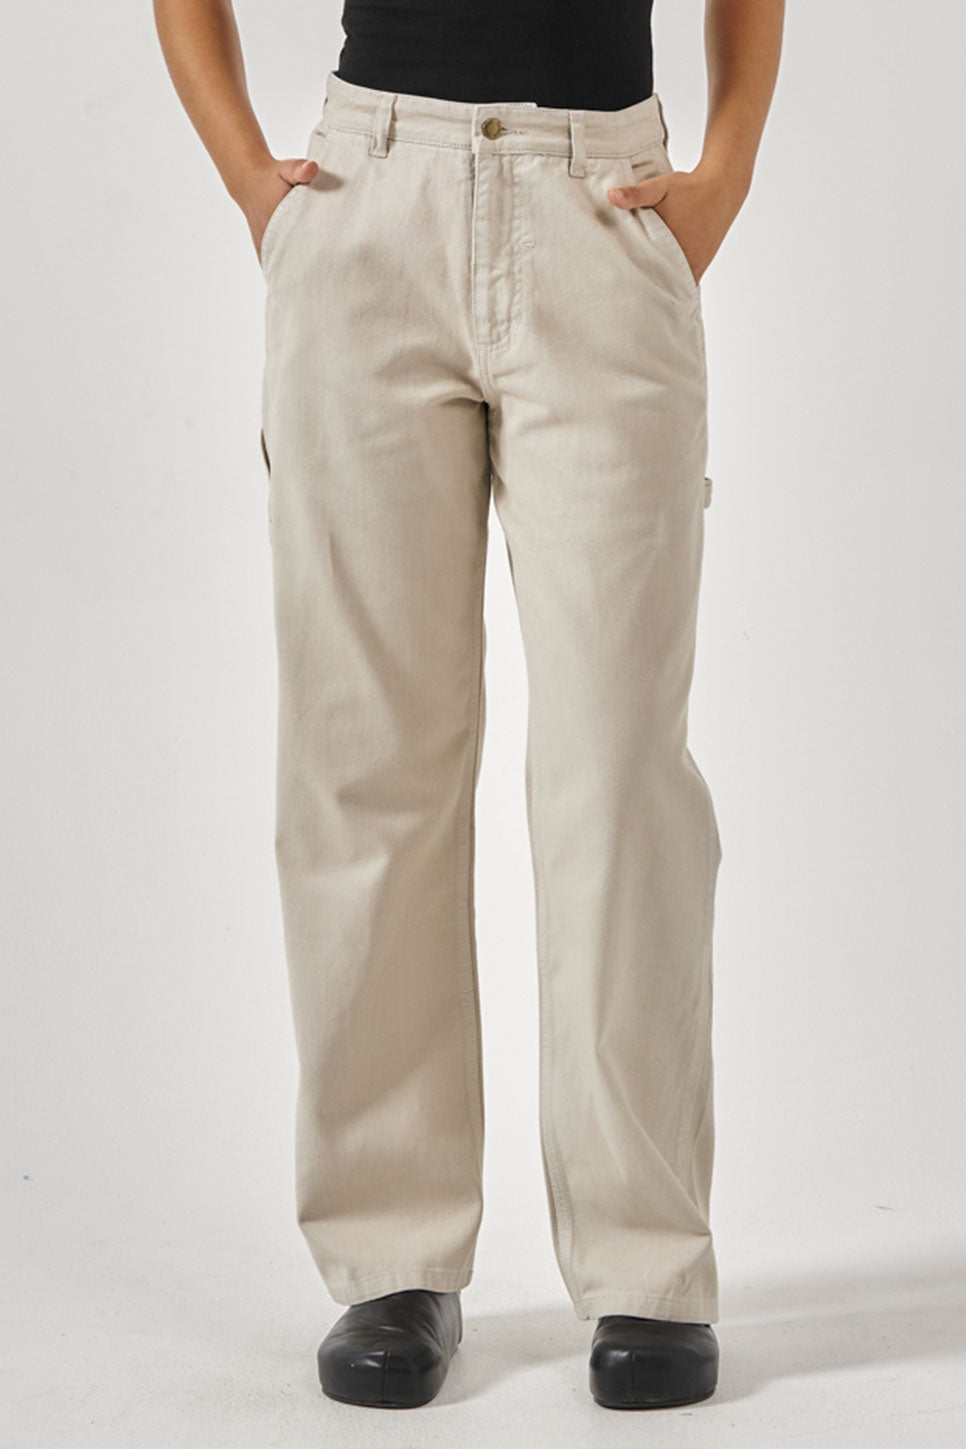 Thrills - Painter Pant - Oatmeal - Front